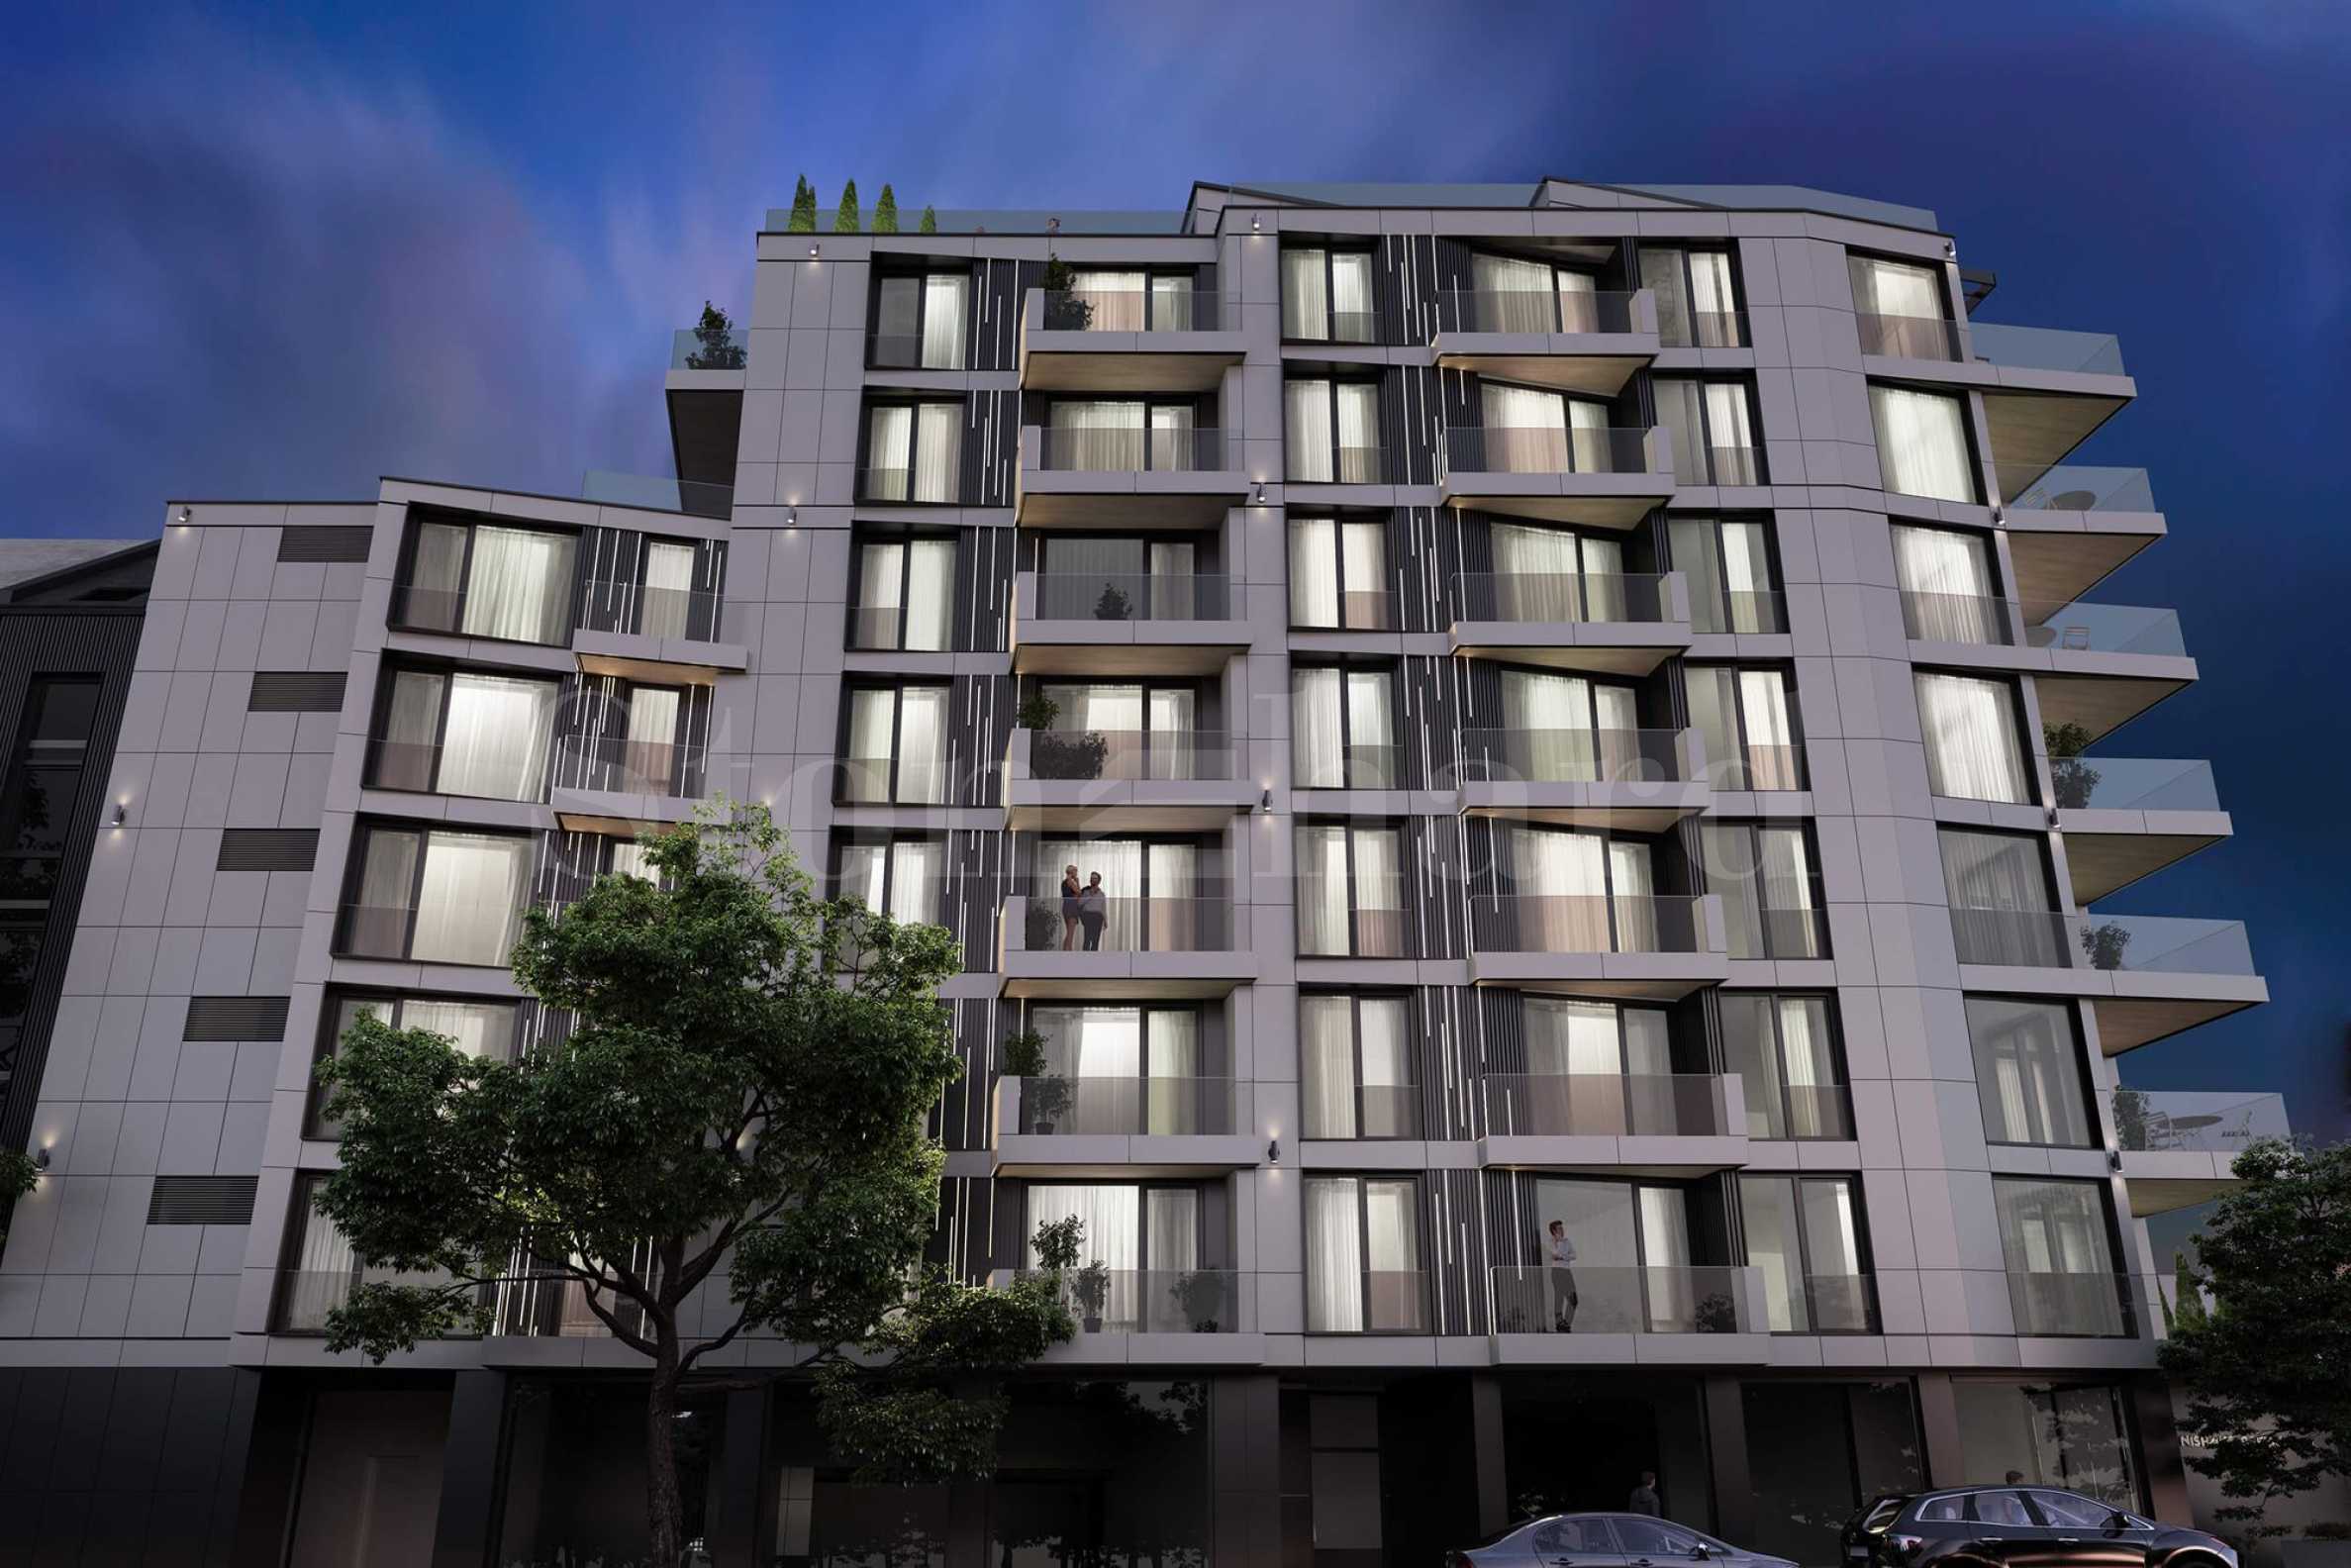 Residential building with different types of apartments in Strelbishte district1 - Stonehard